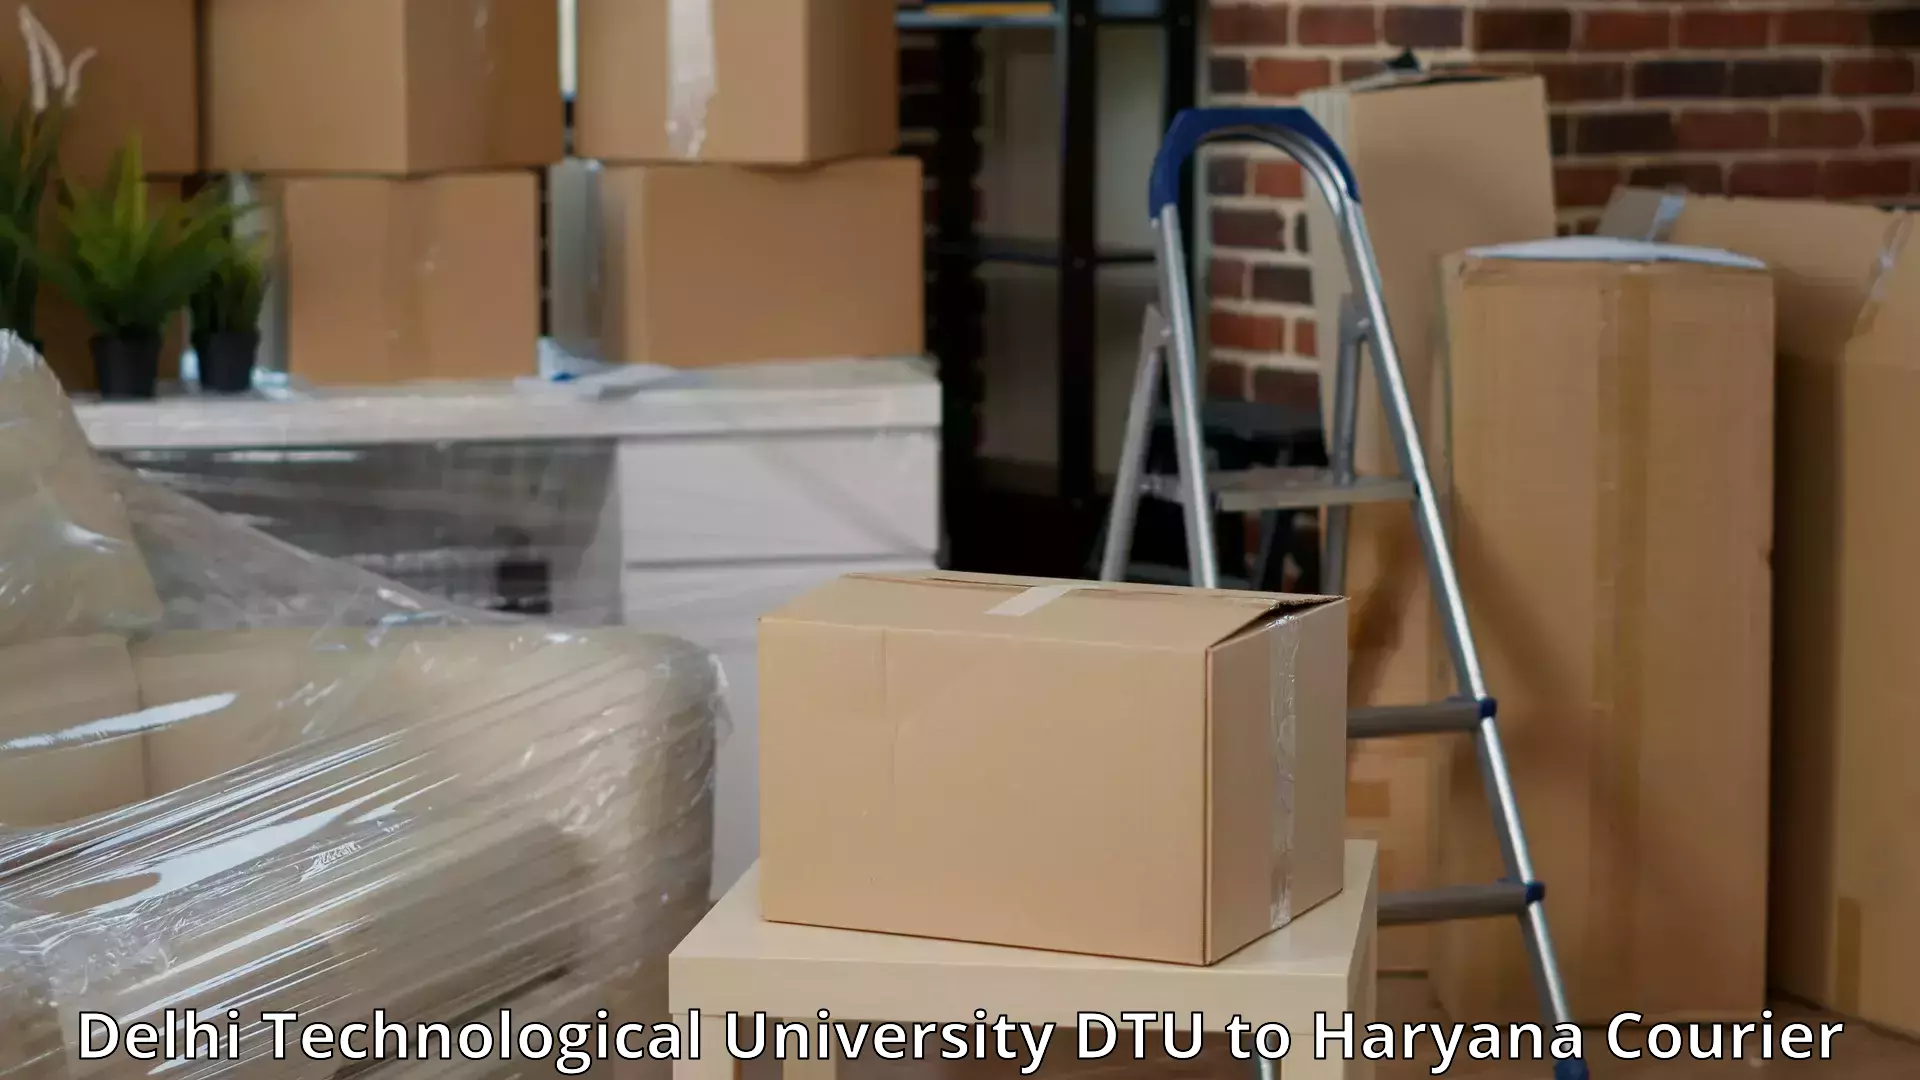 Budget-friendly moving services in Delhi Technological University DTU to Haryana